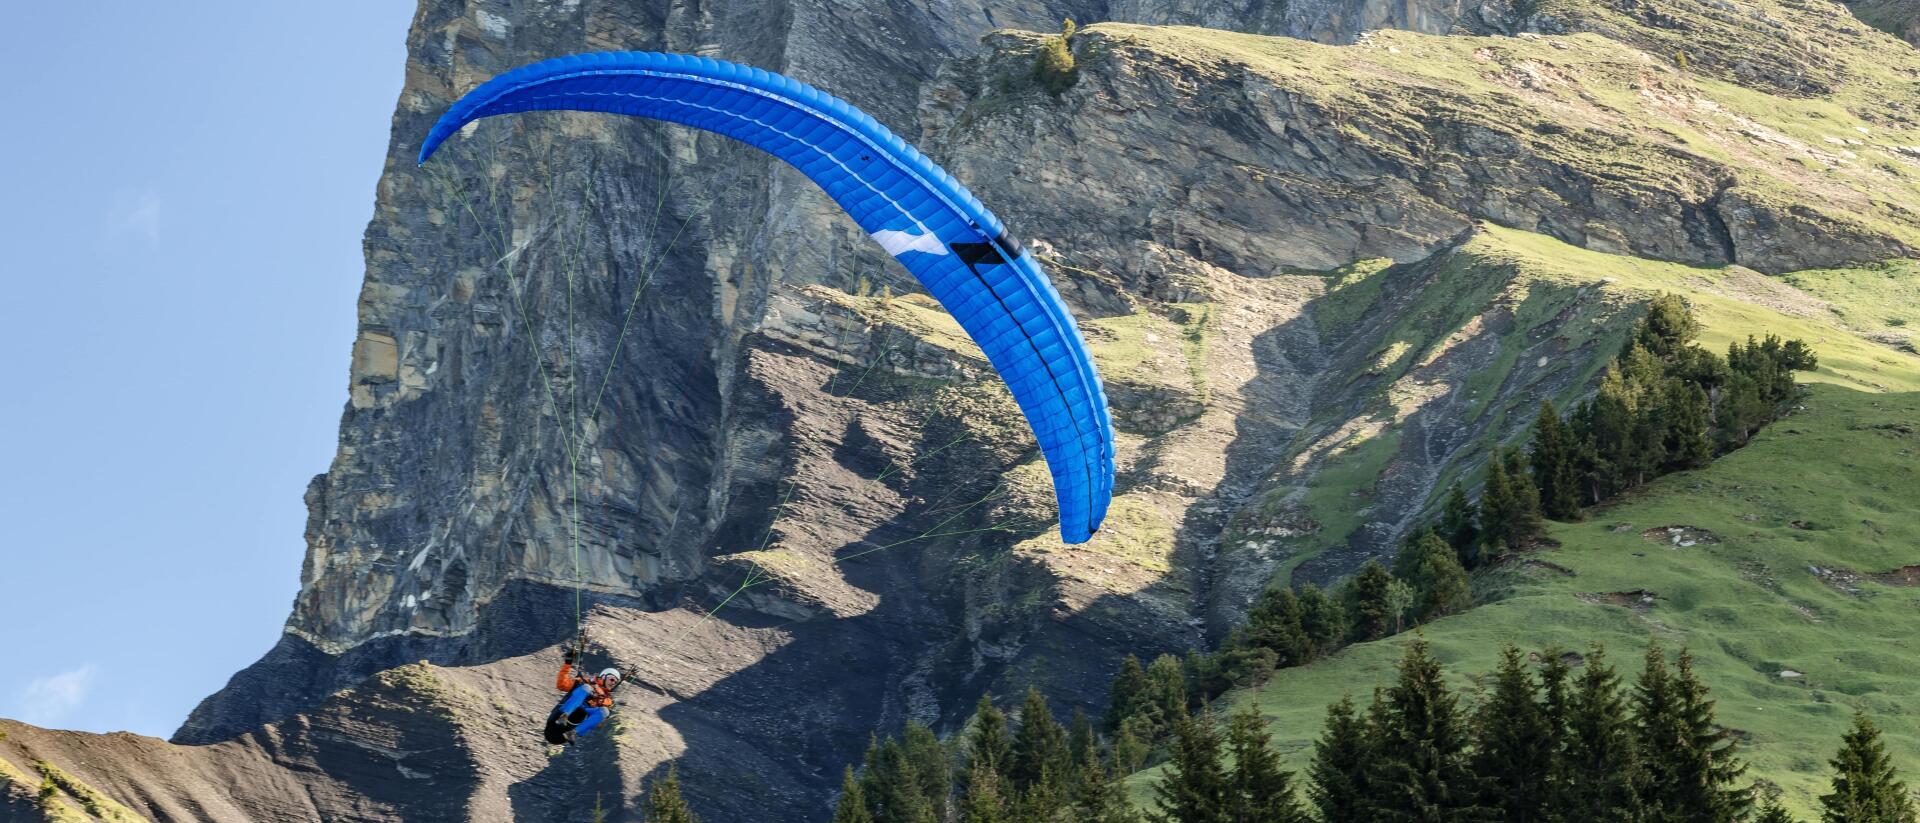 Five tips for getting started with paragliding